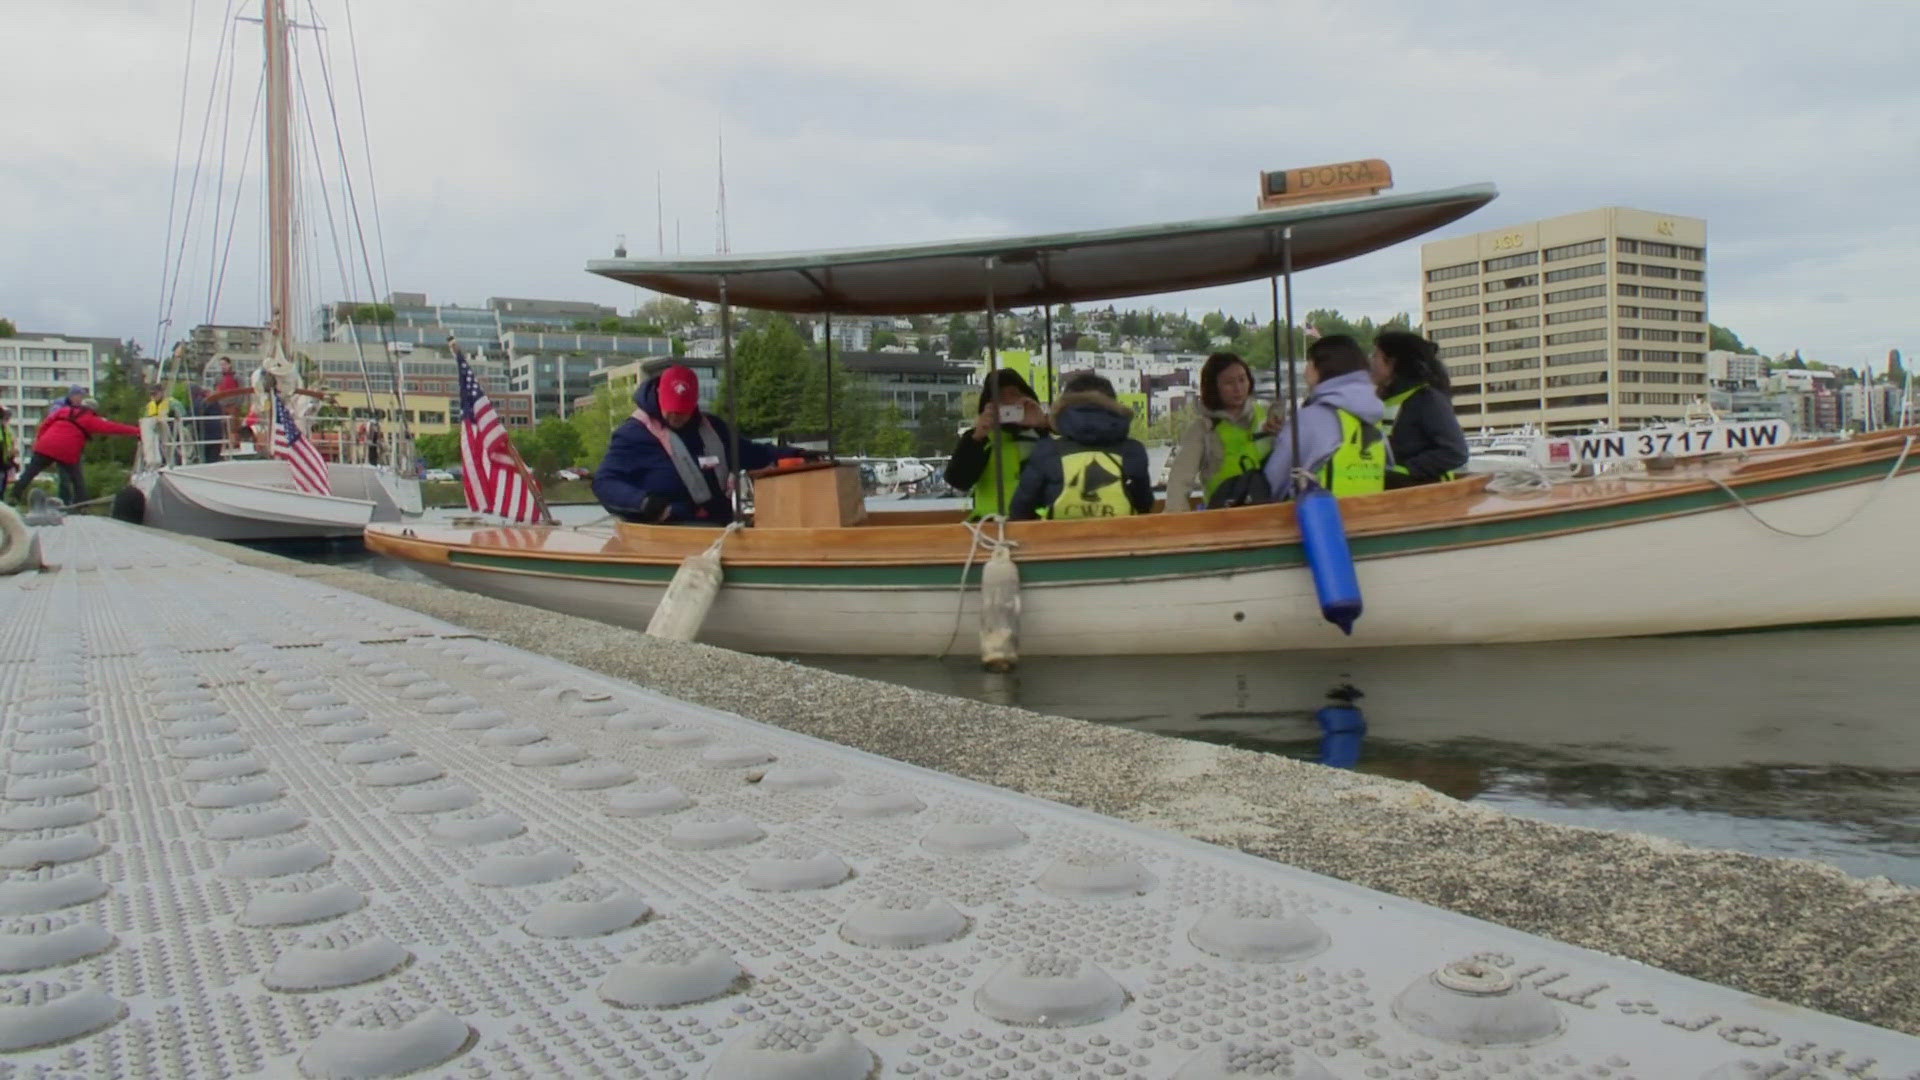 The organization gave more than 500 people free boating experiences on Sunday.